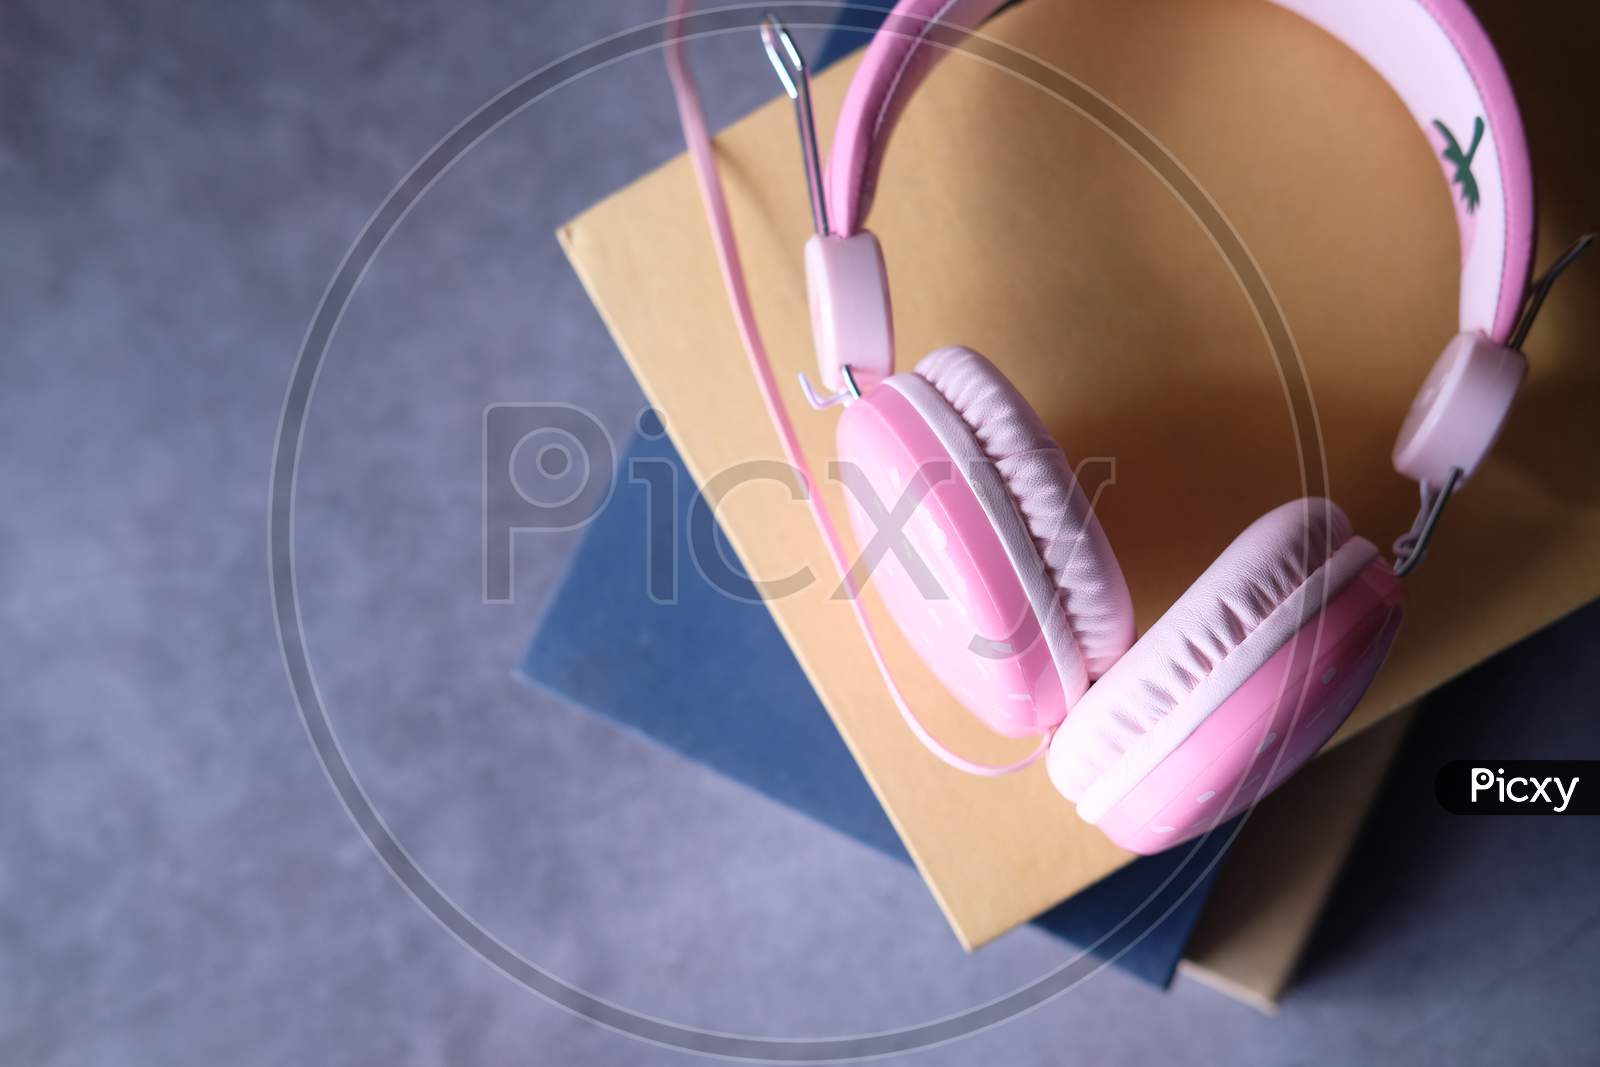 Audio Book Concept. Headphones And Book Over Wooden Table.